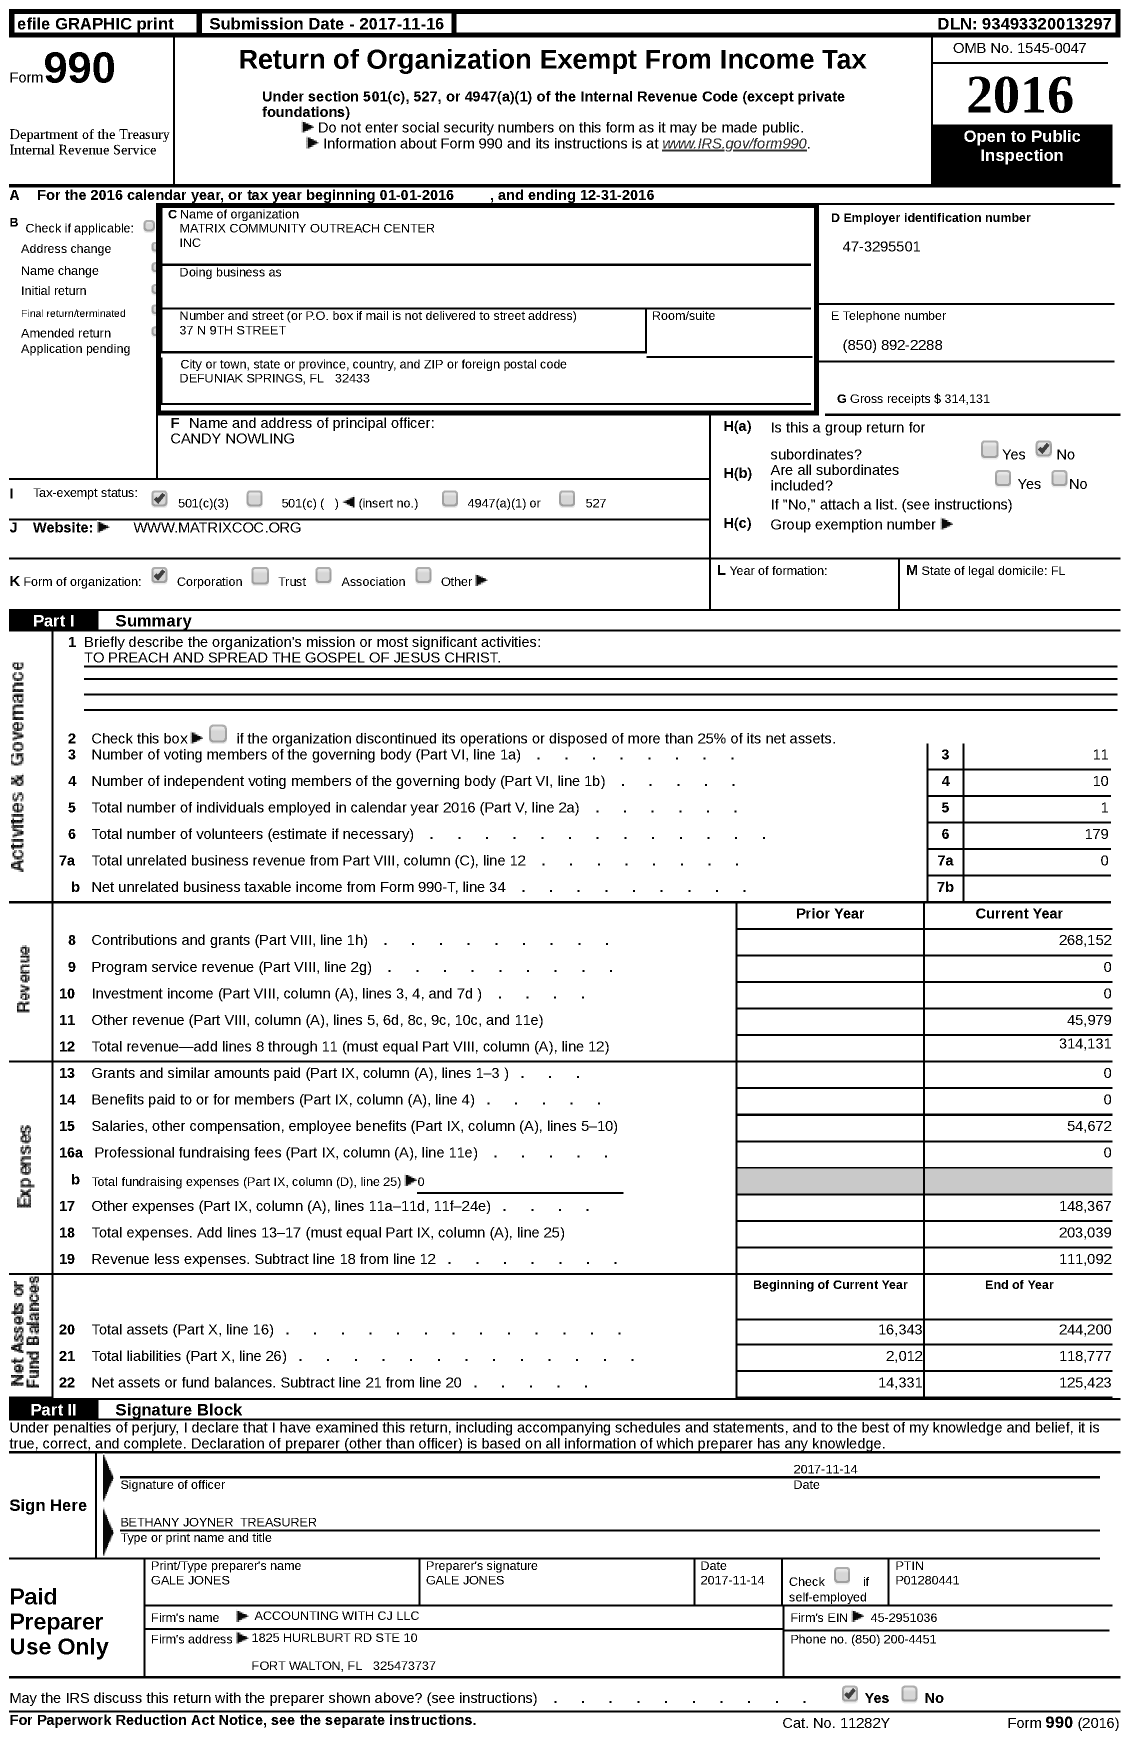 Image of first page of 2016 Form 990 for Matrix Community Outreach Center